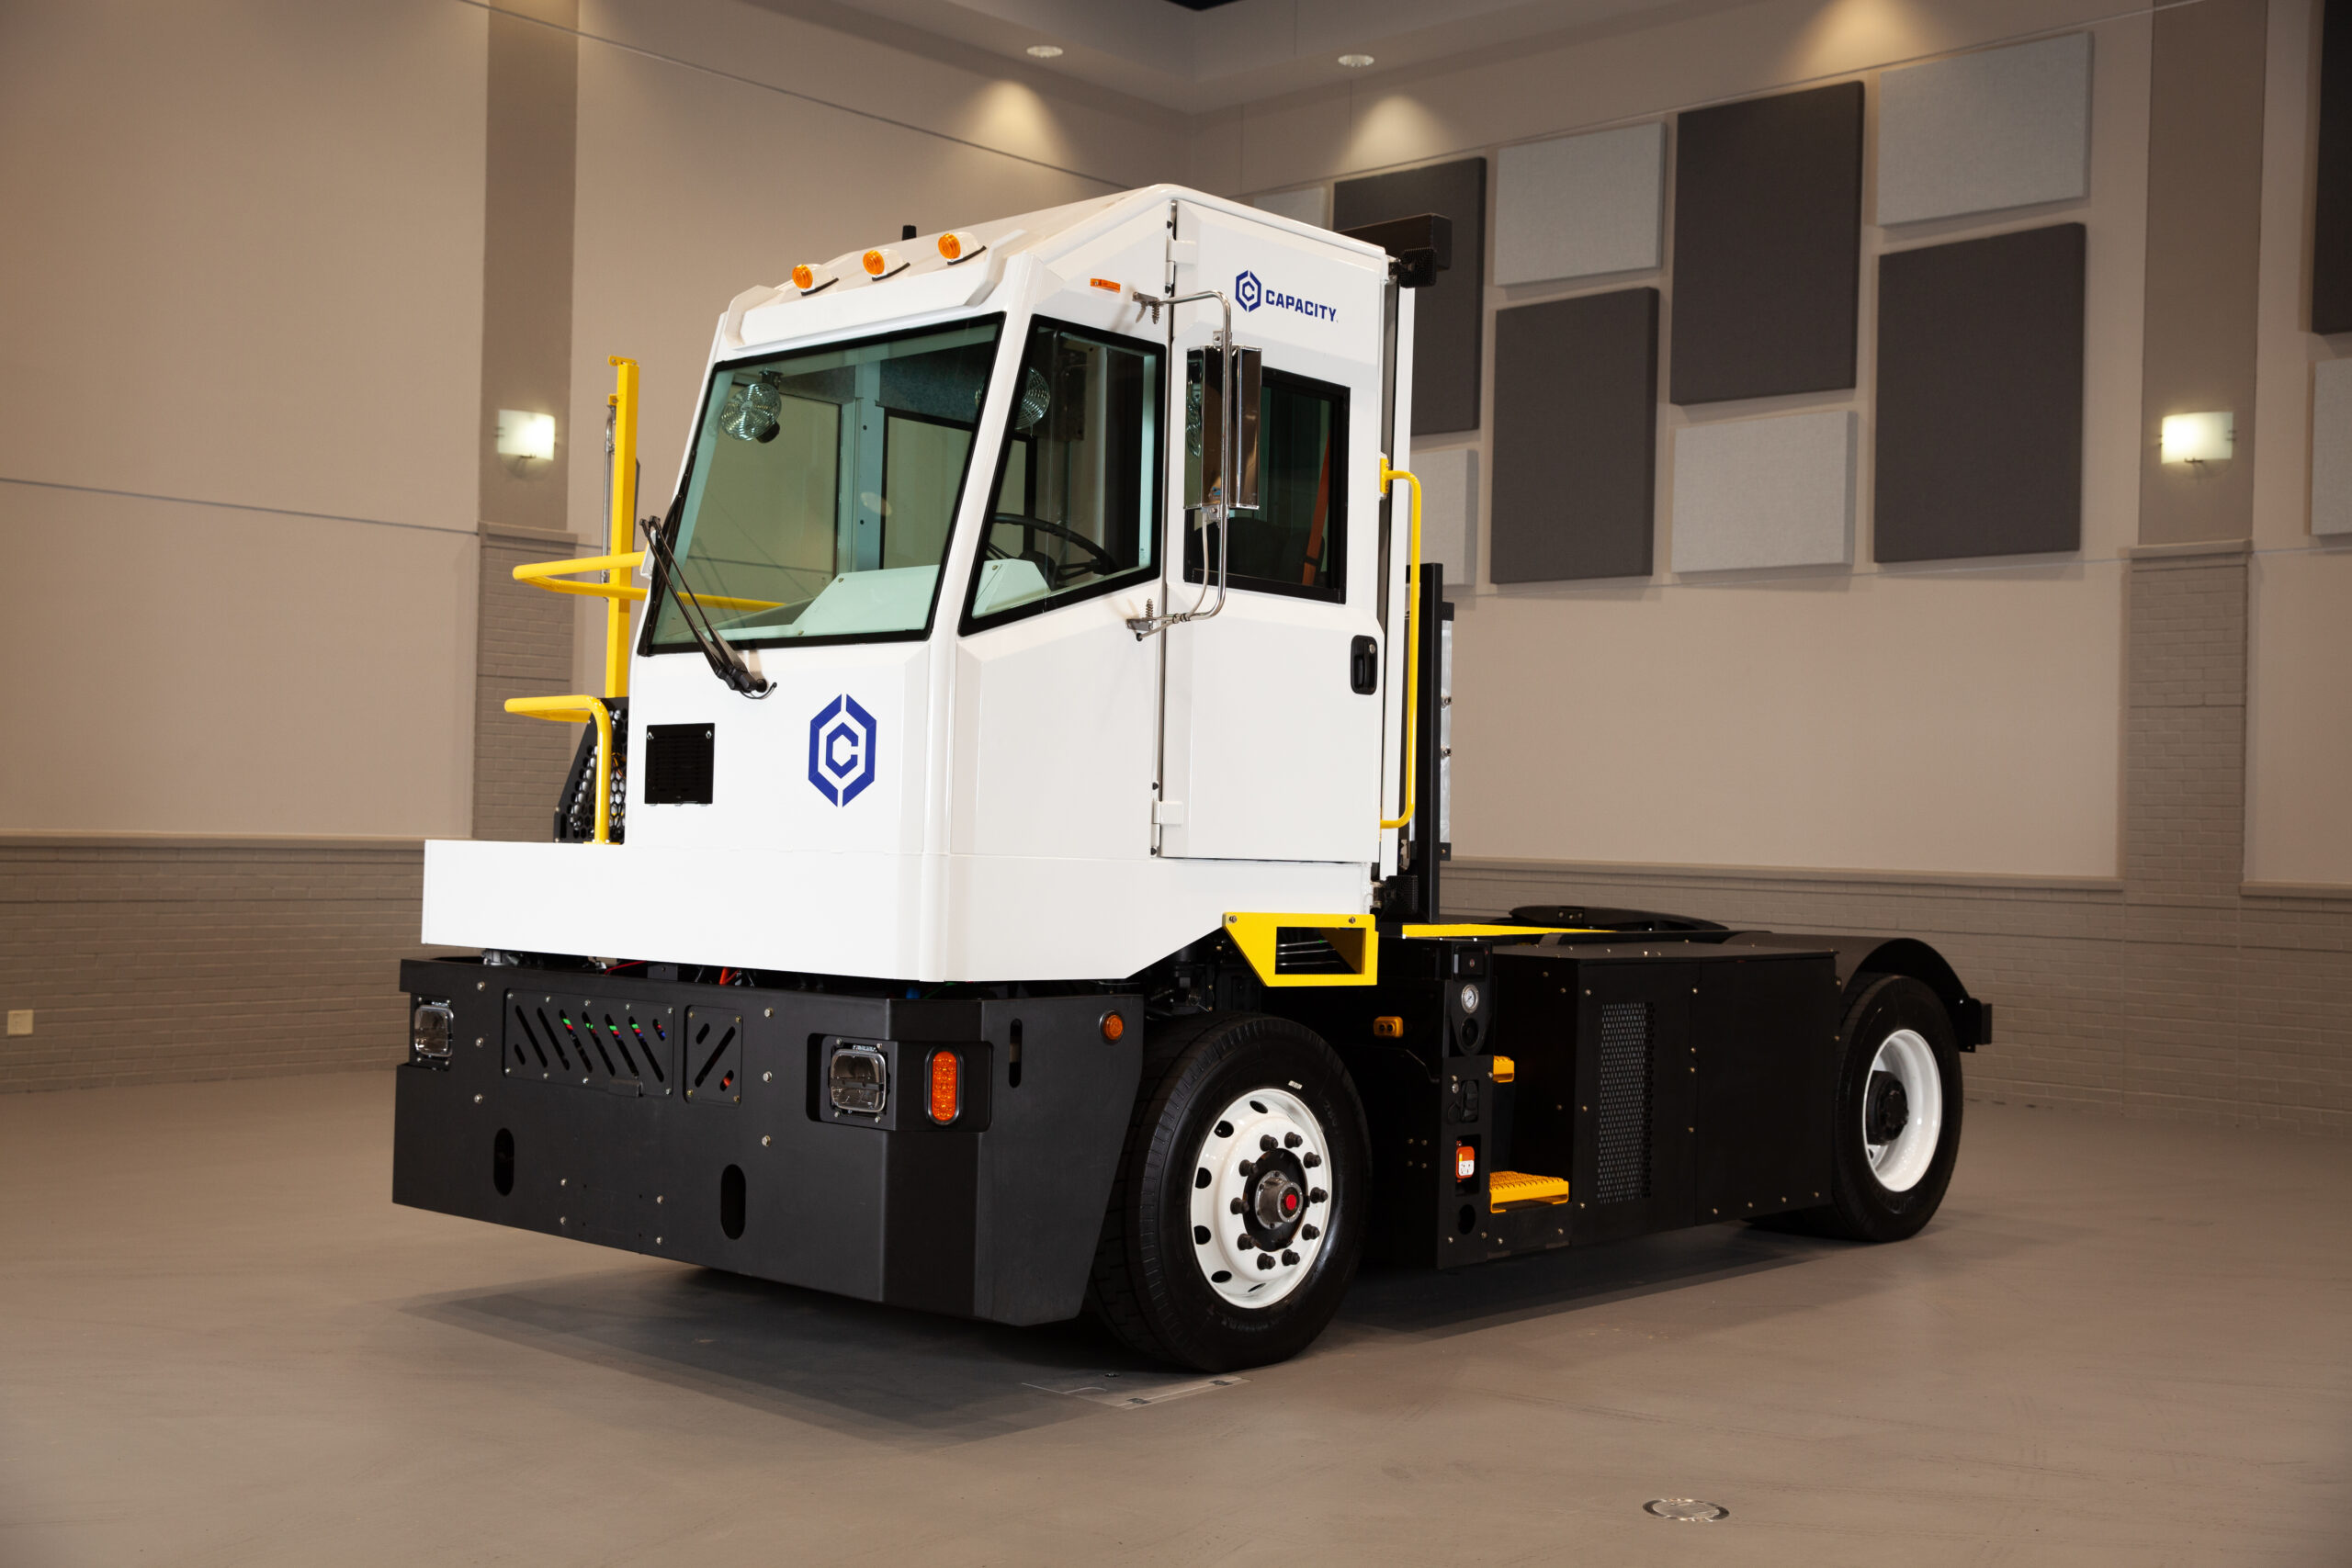 CRM Studios can help you launch your latest product or service. Check out our work with Capacity Trucks and LABOV and call us when you’re ready to get started!